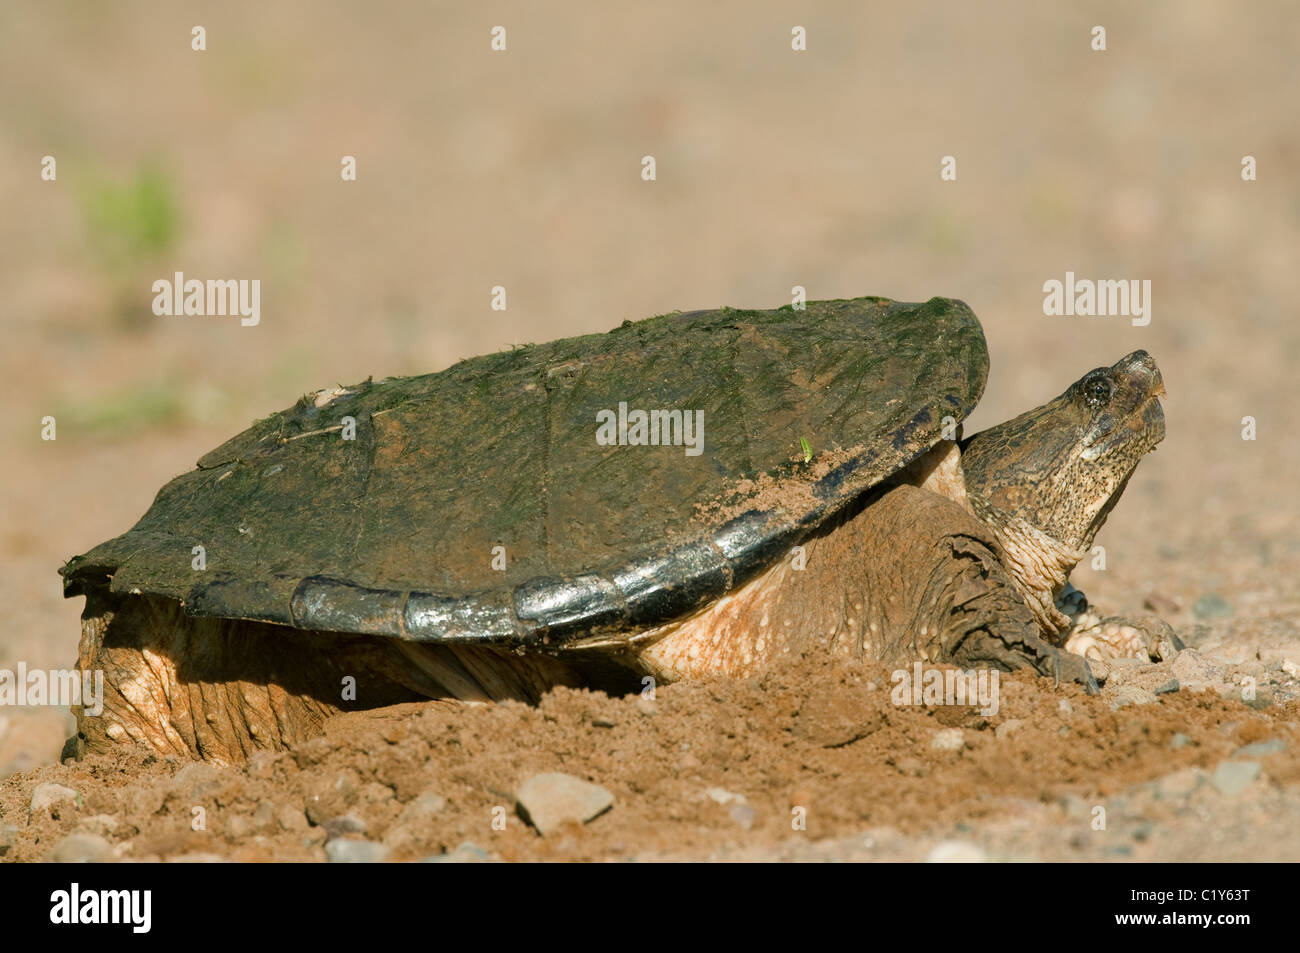 Snapping Turtle laying eggs Chelydra serpentina late May Eastern United States Stock Photo